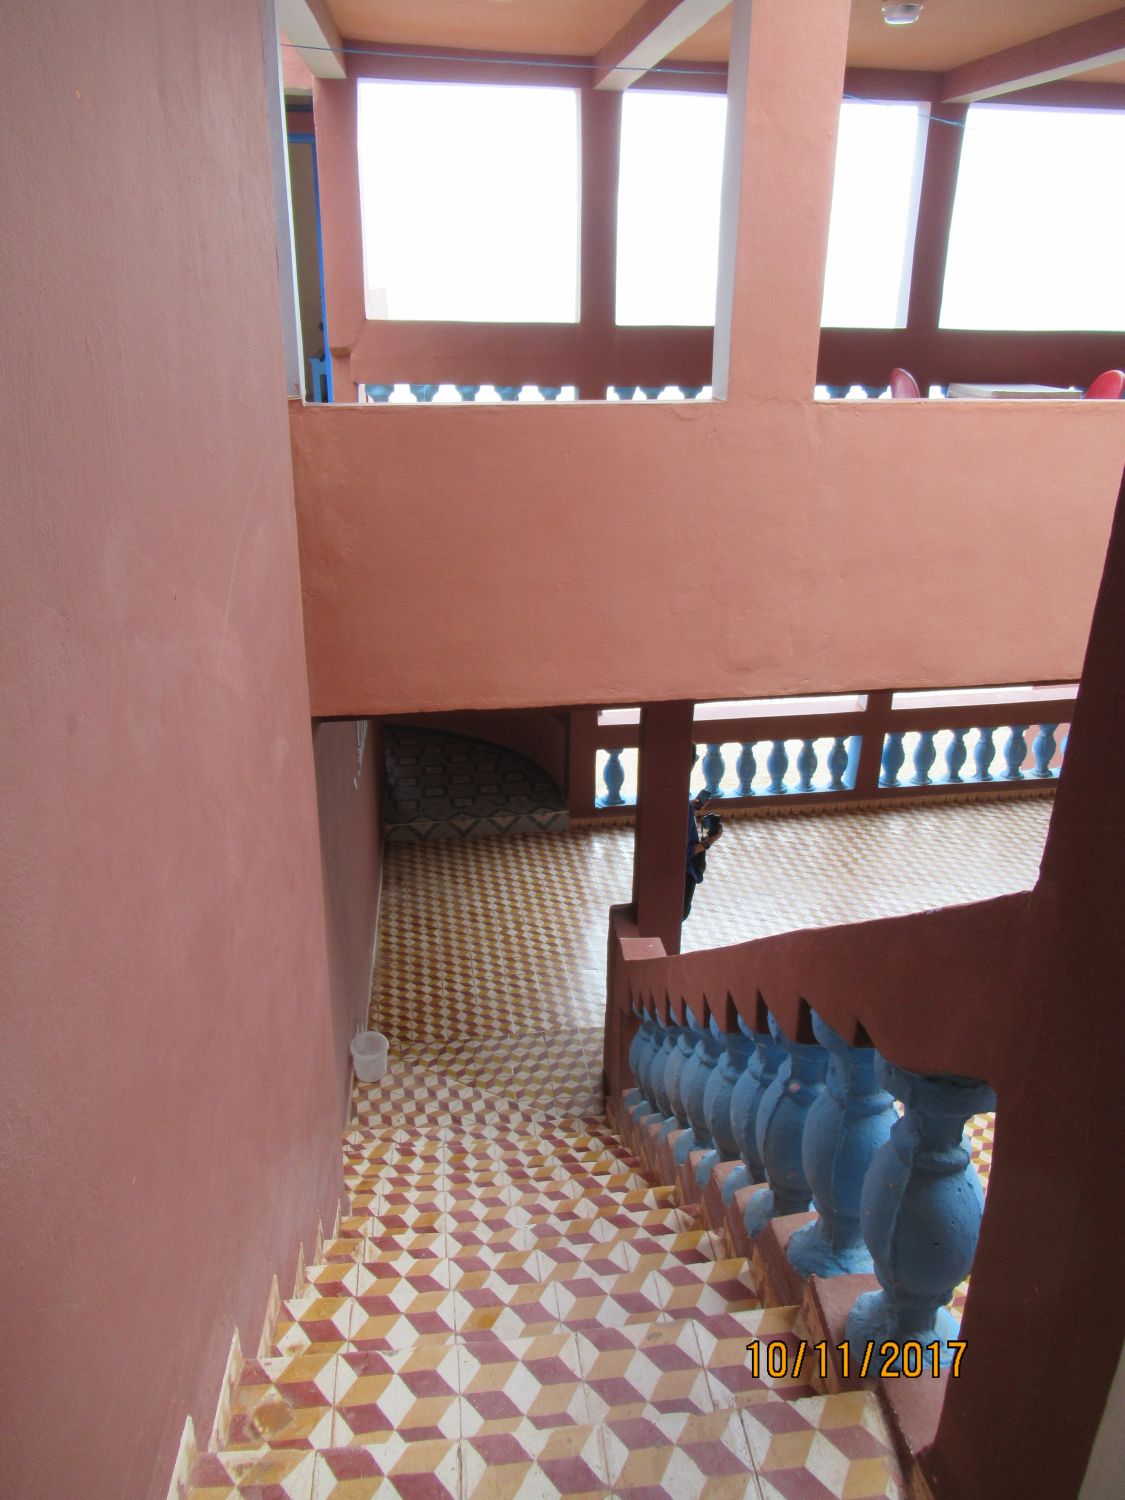 View of hostel staircase.